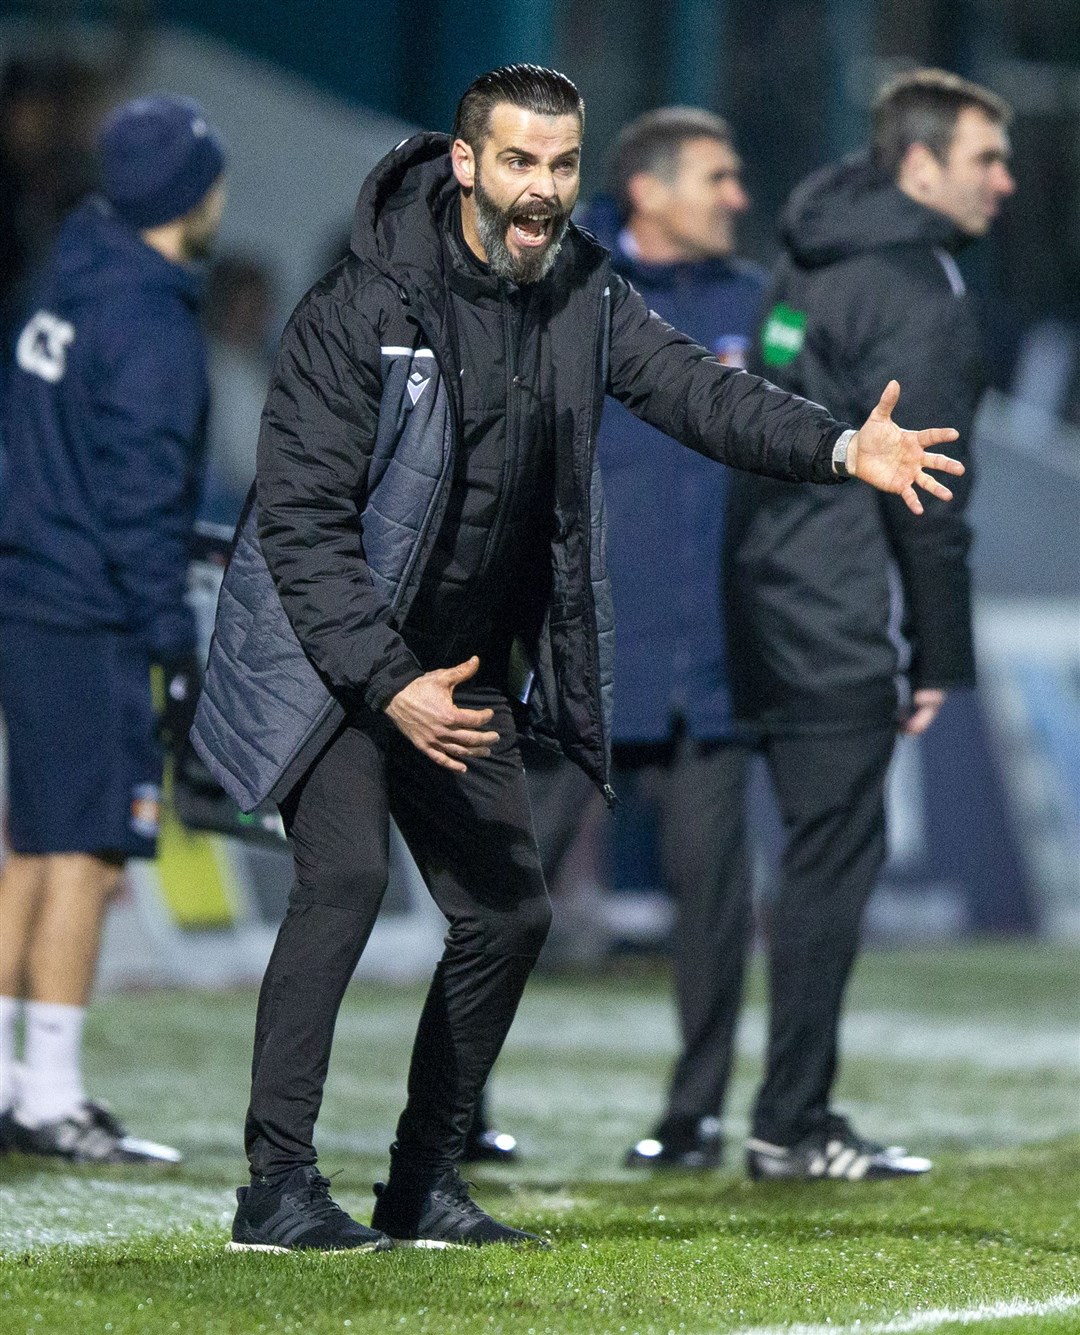 Picture - Ken Macpherson, Inverness. Ross County(1) v Kilmarnock(0). 14.12.19. Ross County co-manager Stuart Kettlewell.